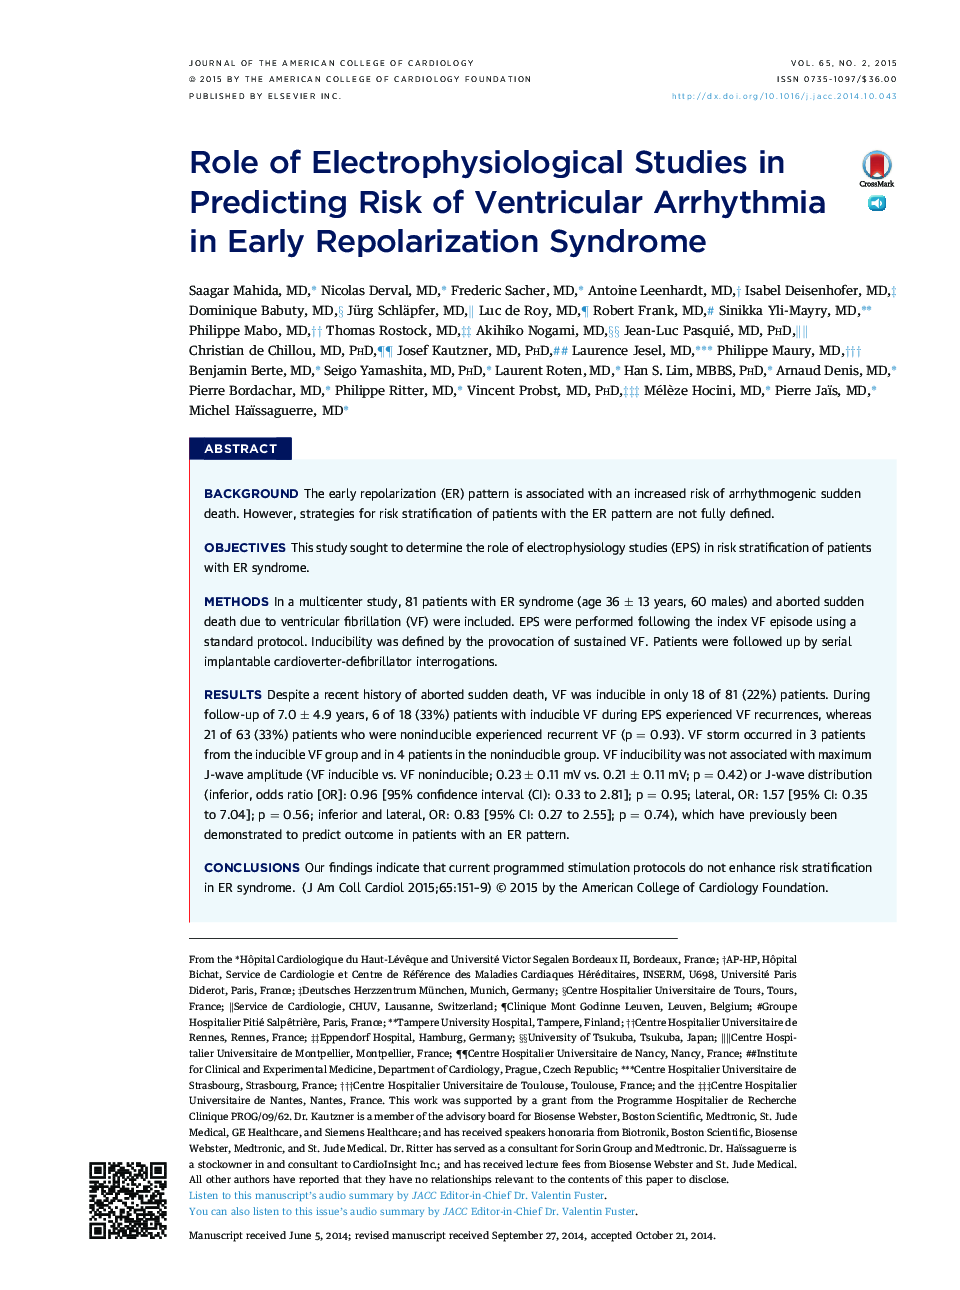 Role of Electrophysiological Studies in Predicting Risk of Ventricular Arrhythmia in Early Repolarization Syndrome 